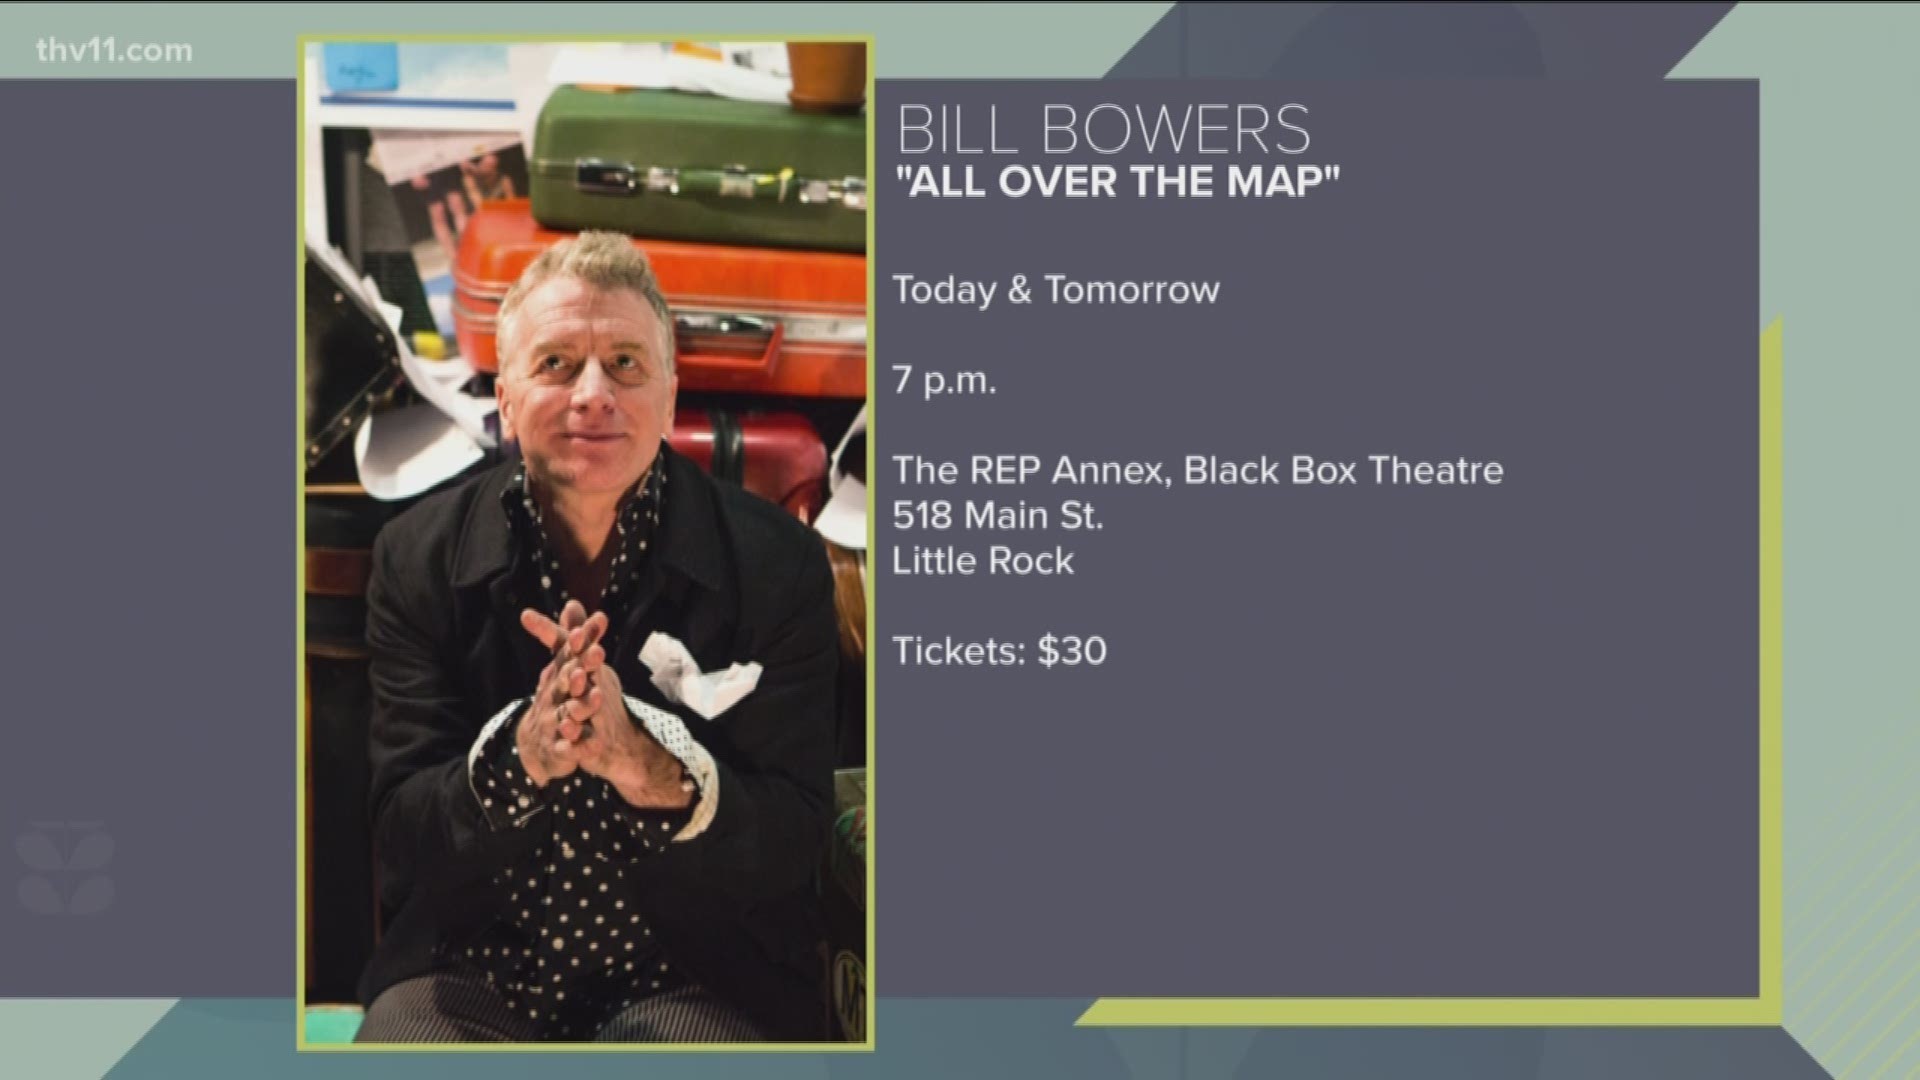 Mime Artist Bill Bowers will be performing 'All Over the Map' September 19 and 20 at Arkansas Repertory Theater Annex at 7 p.m.